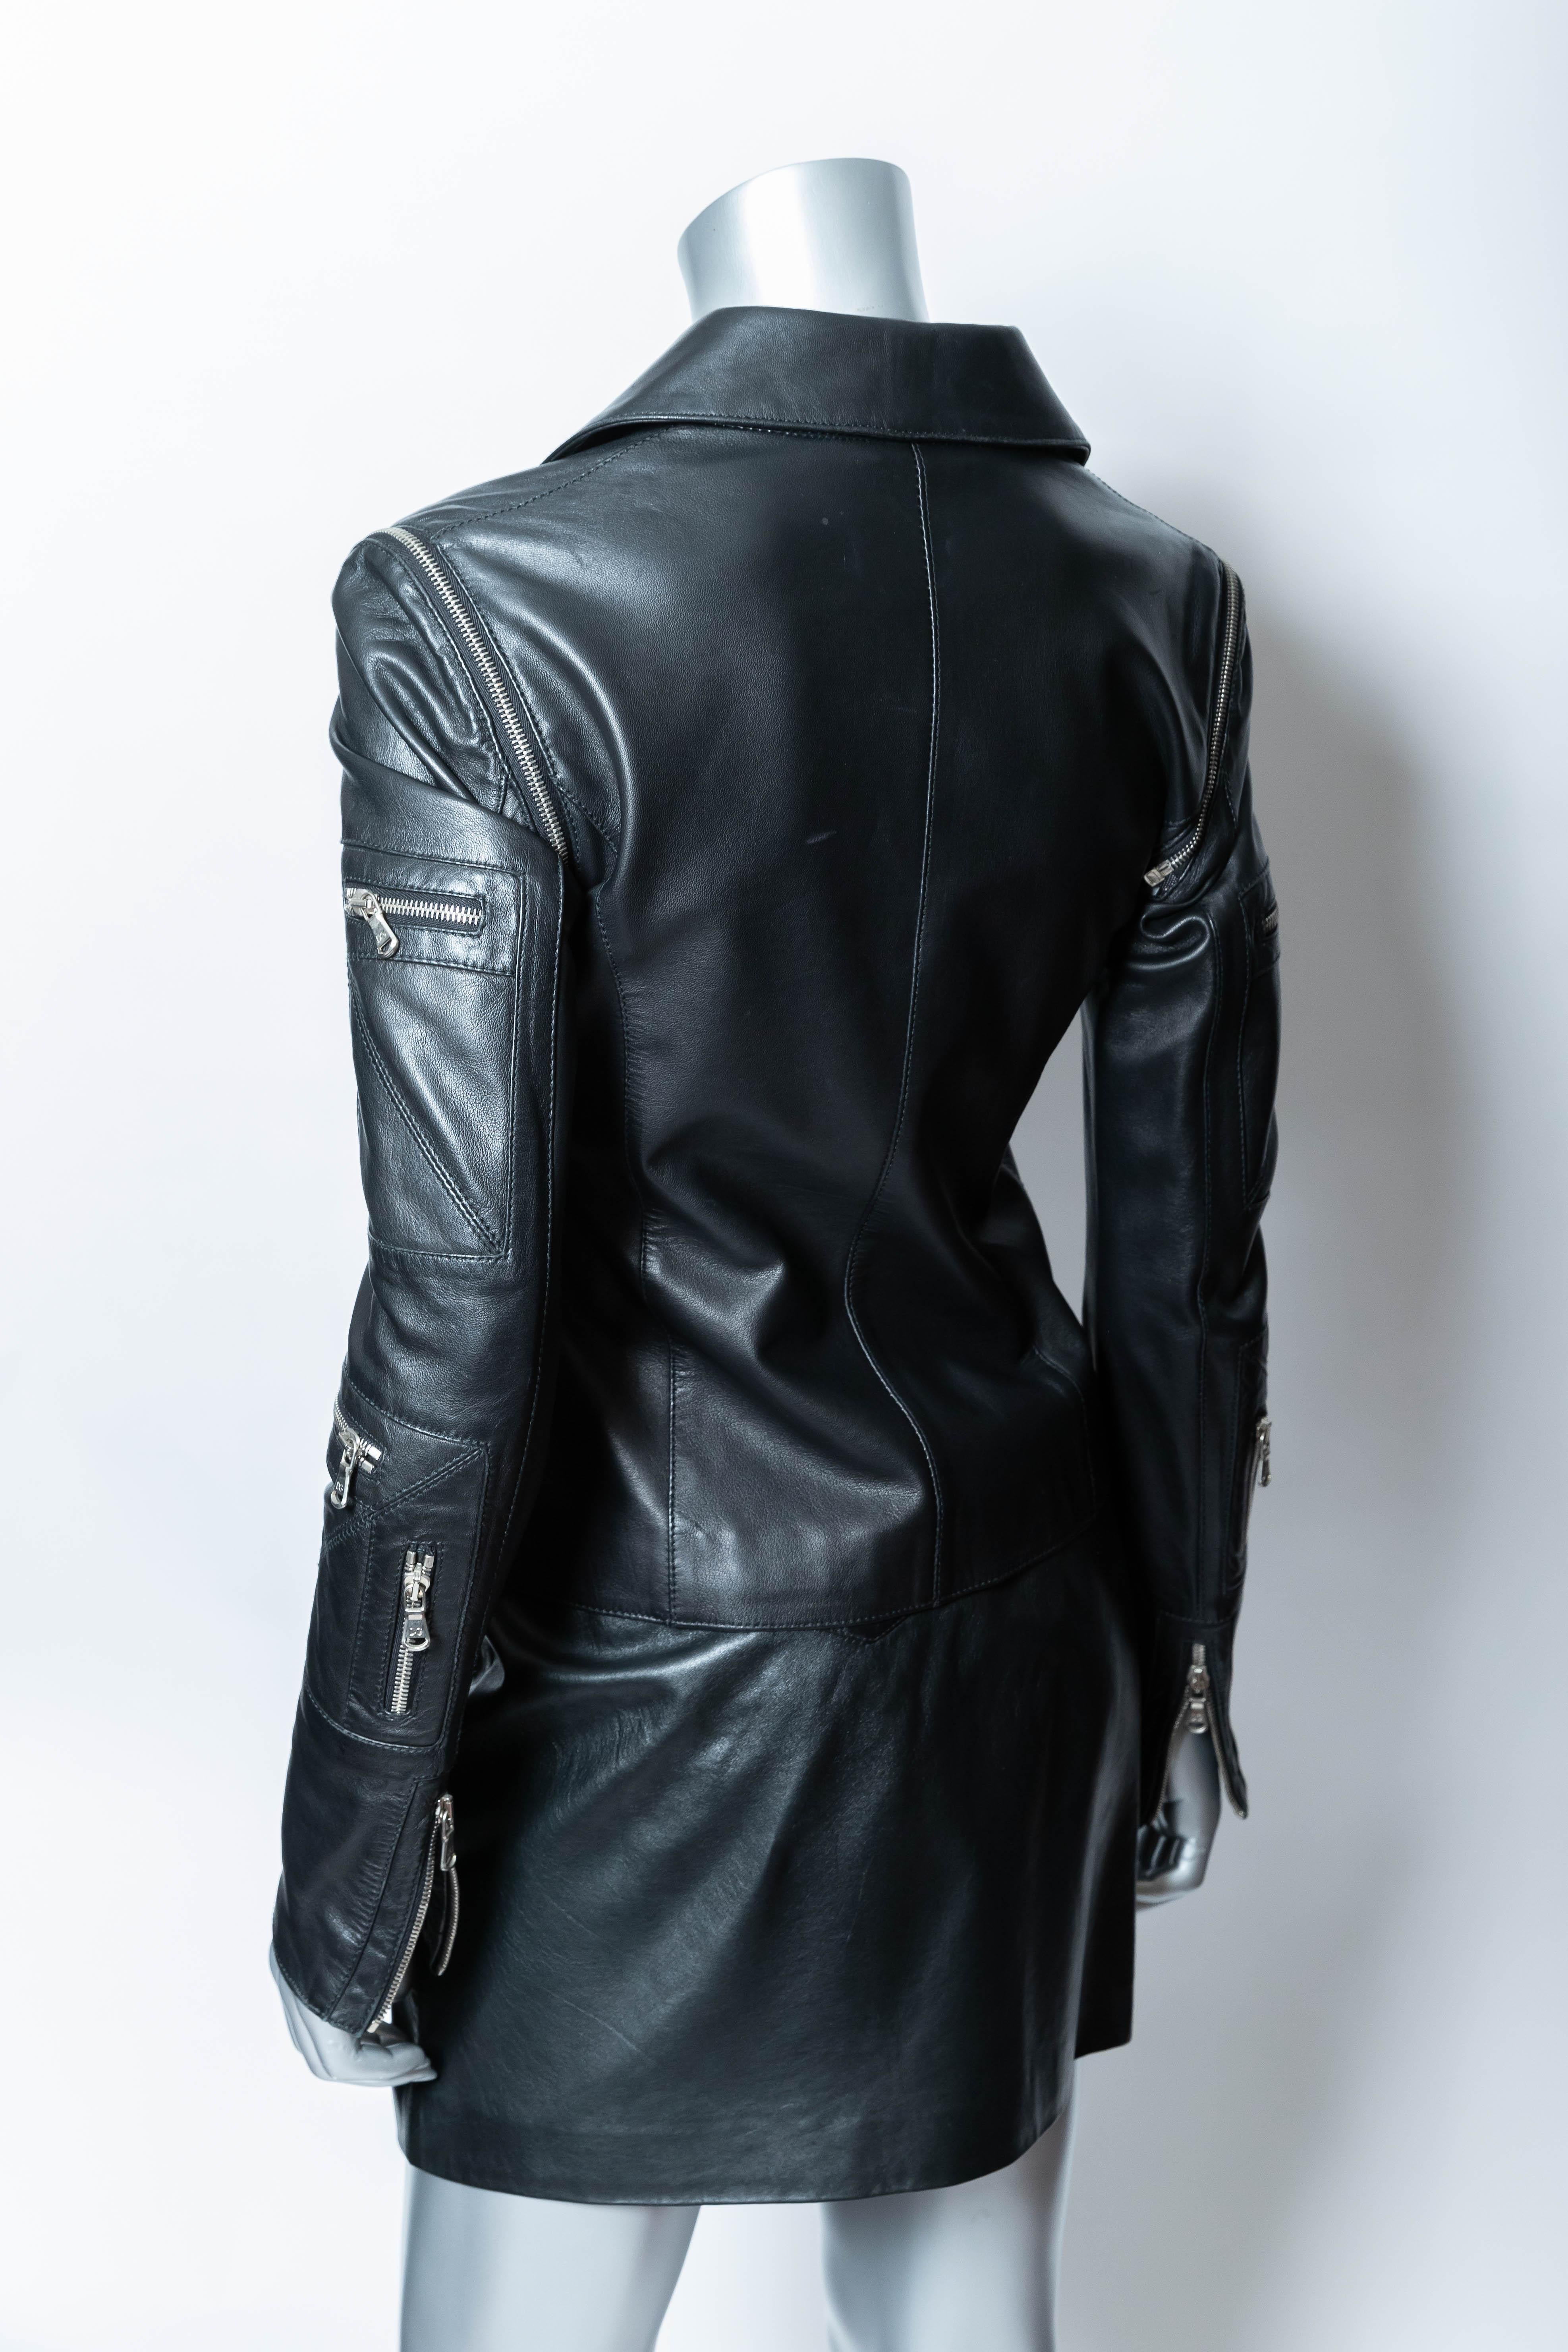 Dolce & Gabbana Black Leather Jacket with Detachable Sleeves For Sale 2